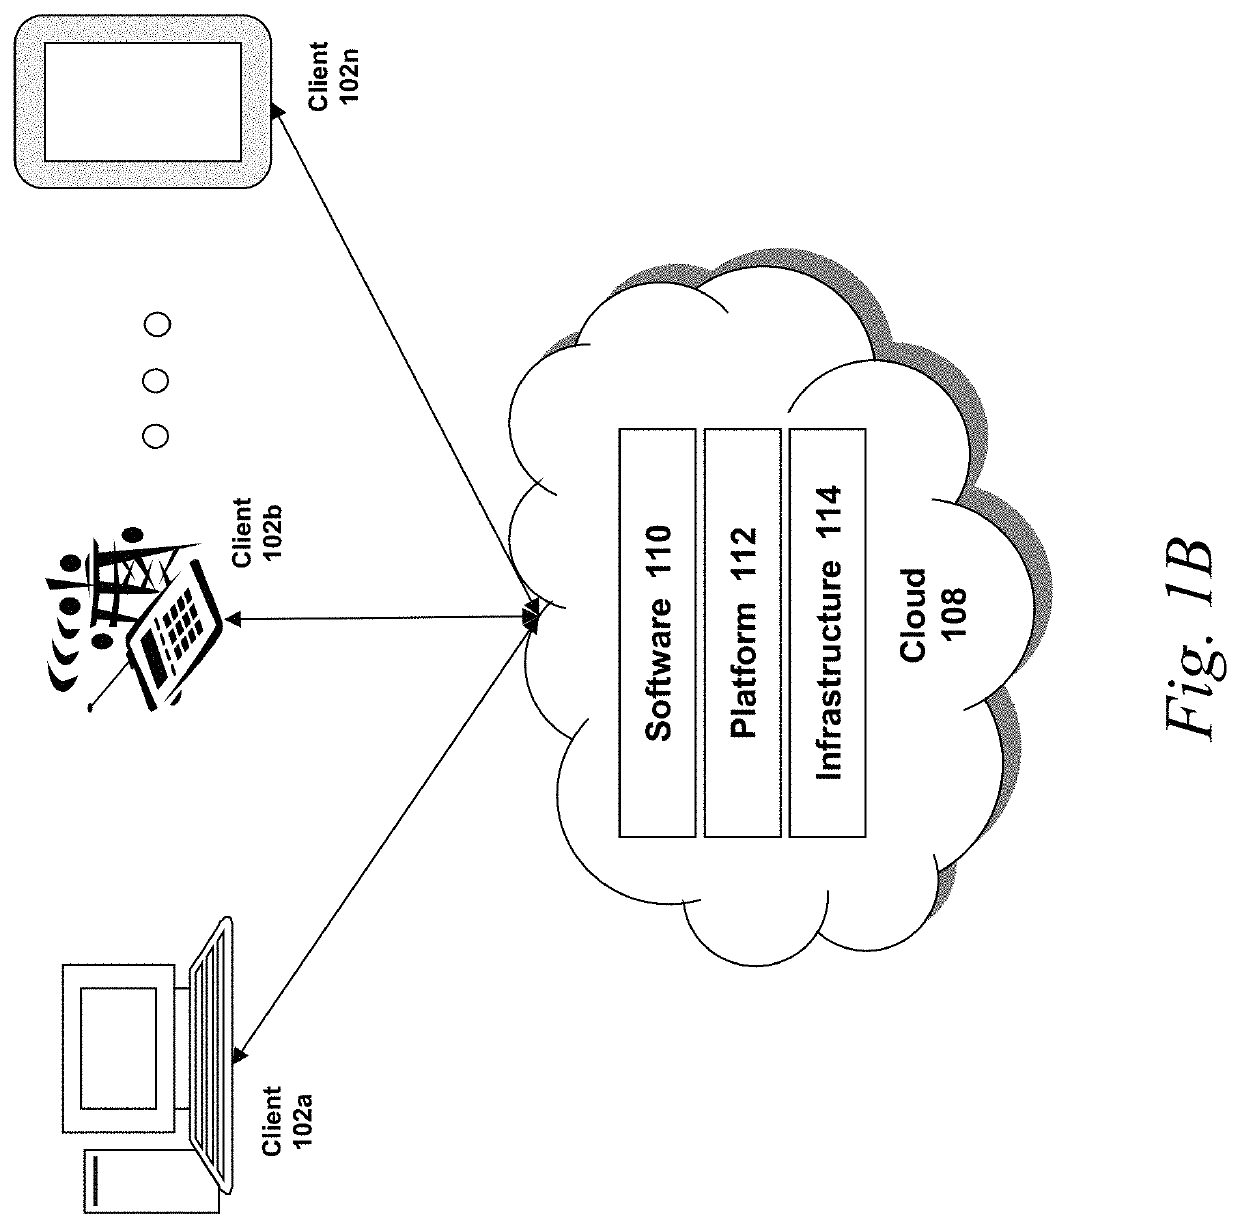 Systems and methods for reducing resource consumption via information technology infrastructure